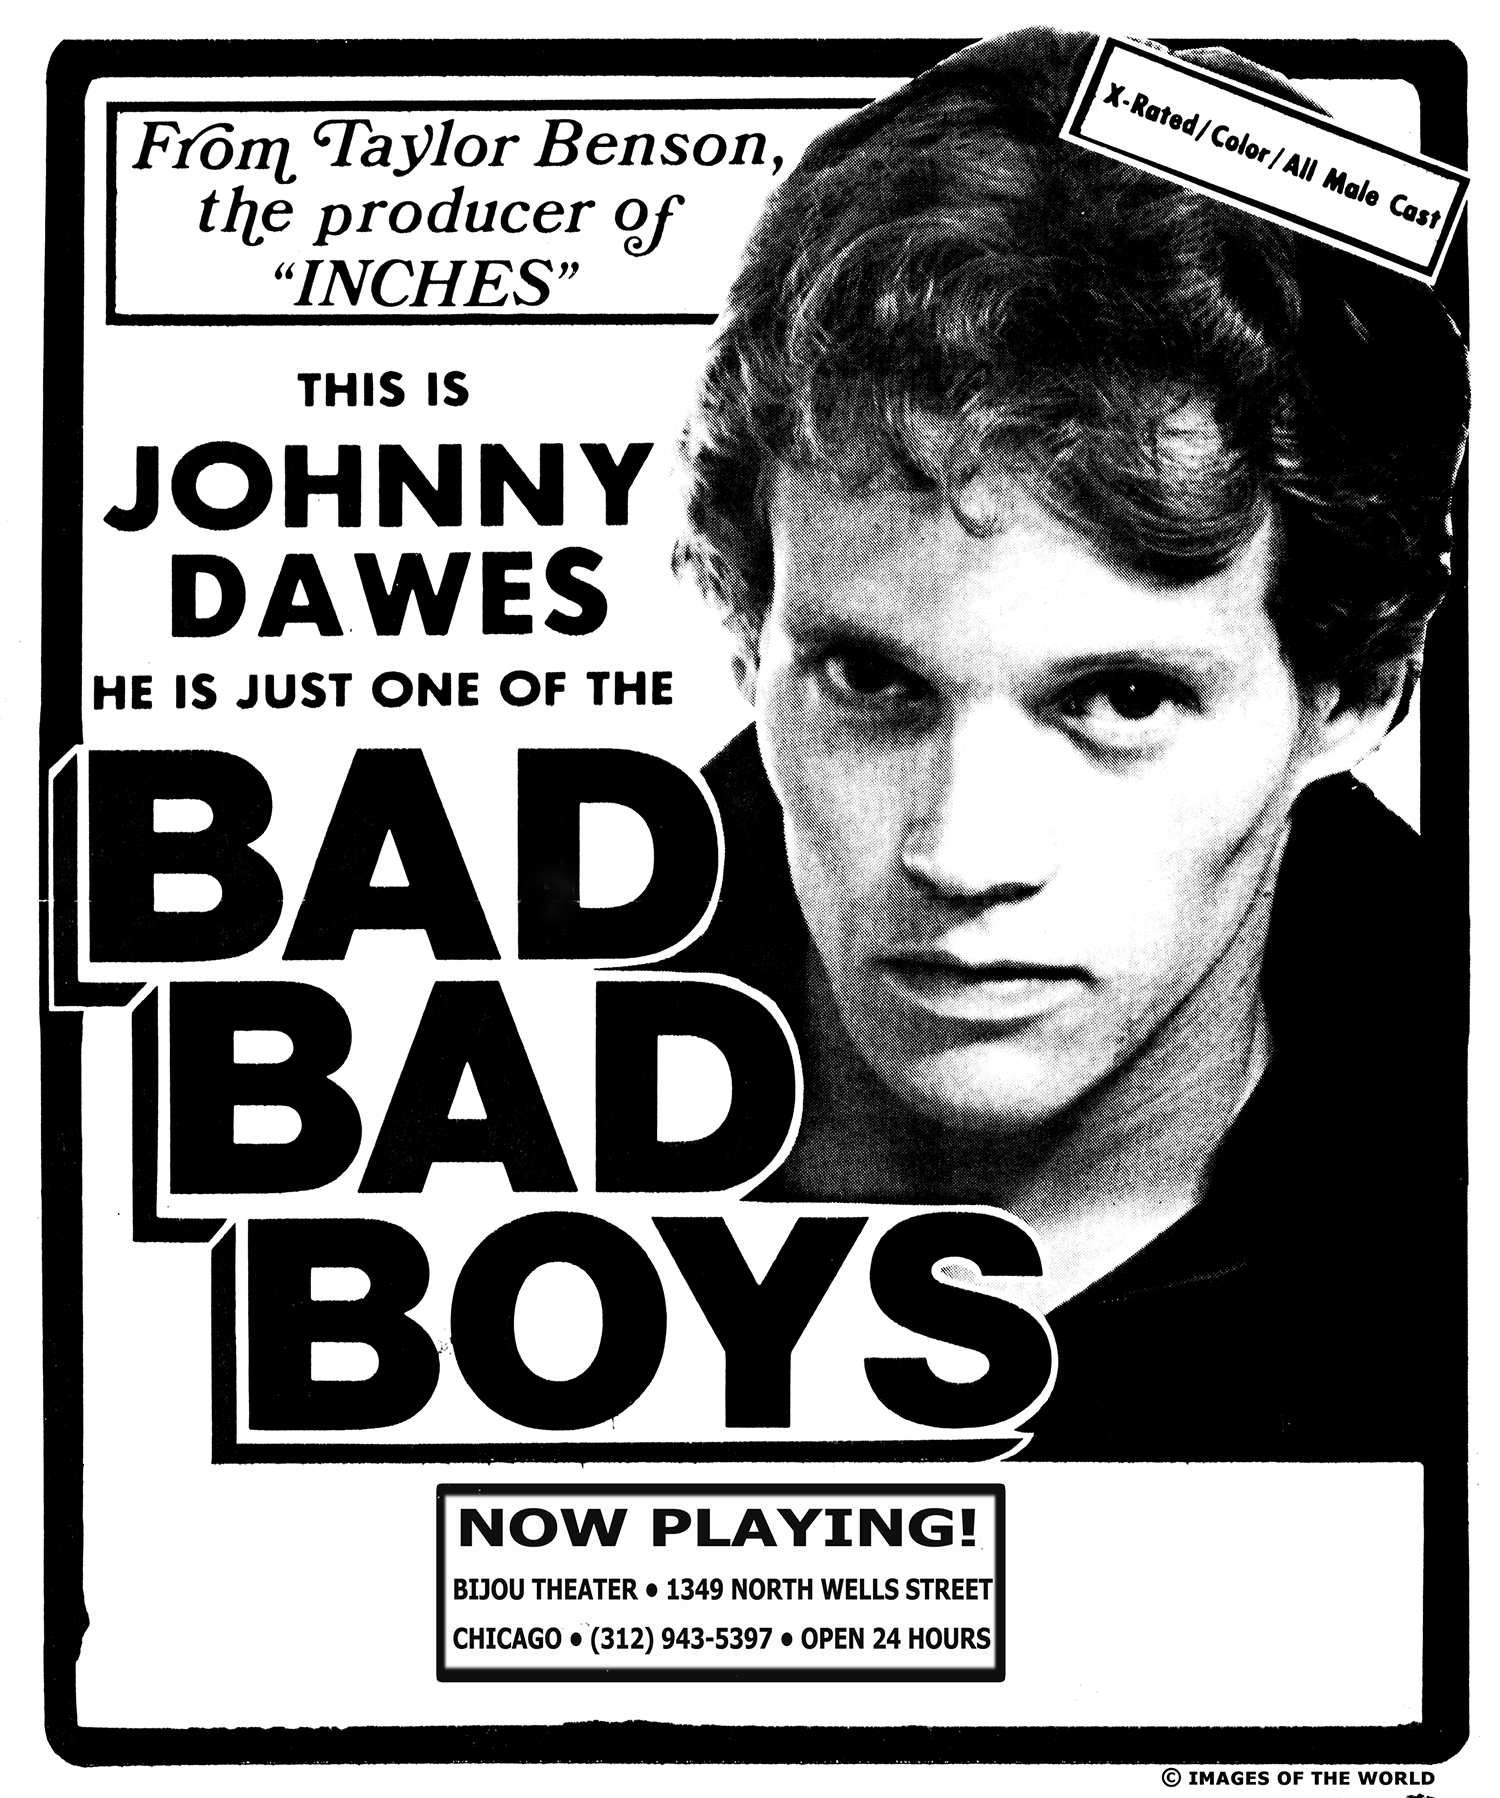 Poster for Bad Bad Boys